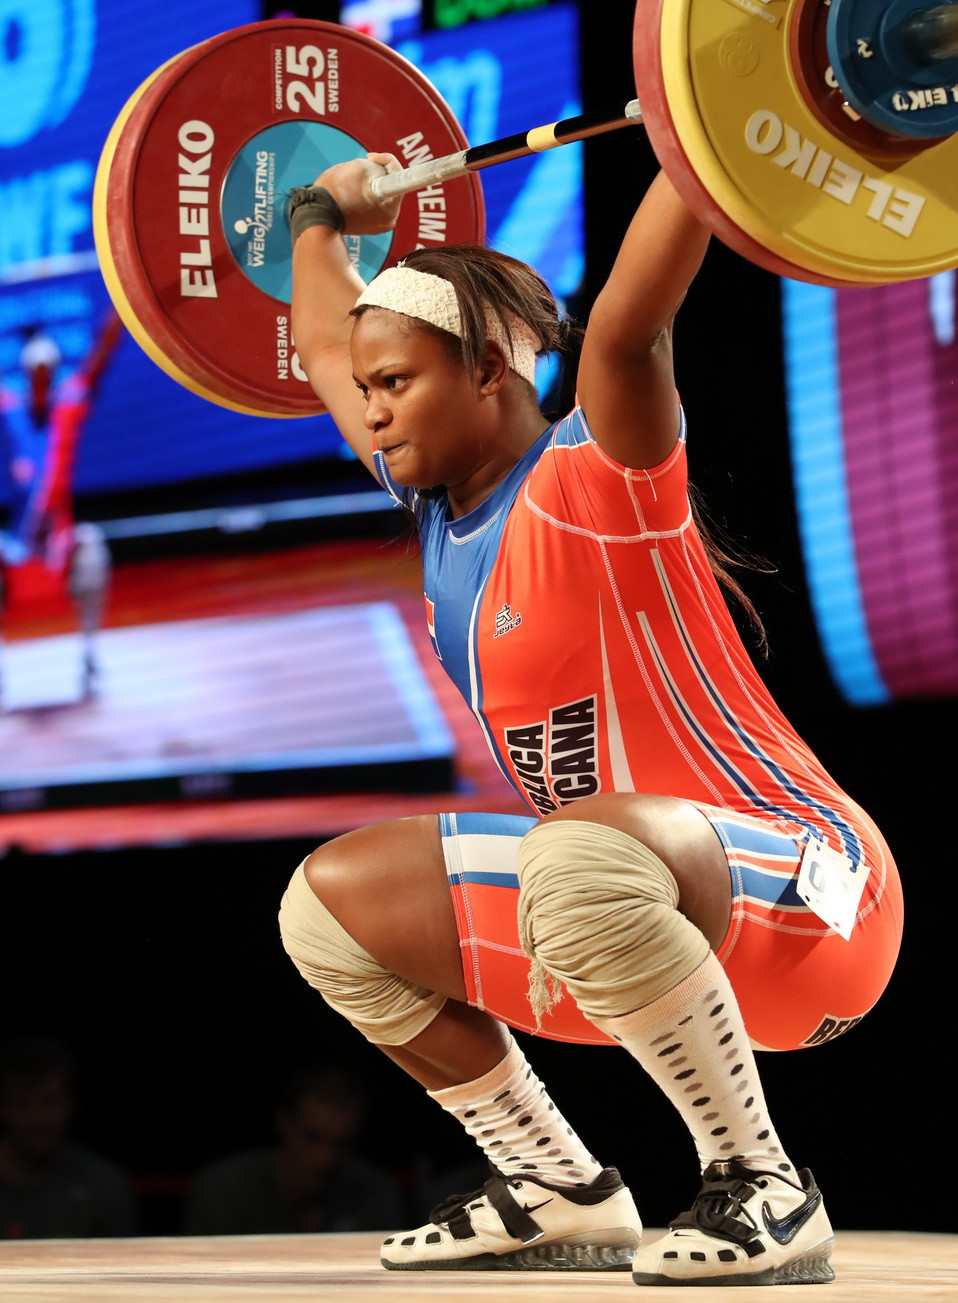 The Dominican Republic's Crismery Dominga Santana Peguero finished third overall after taking silver in the snatch and bronze in the clean and jerk ©IWF